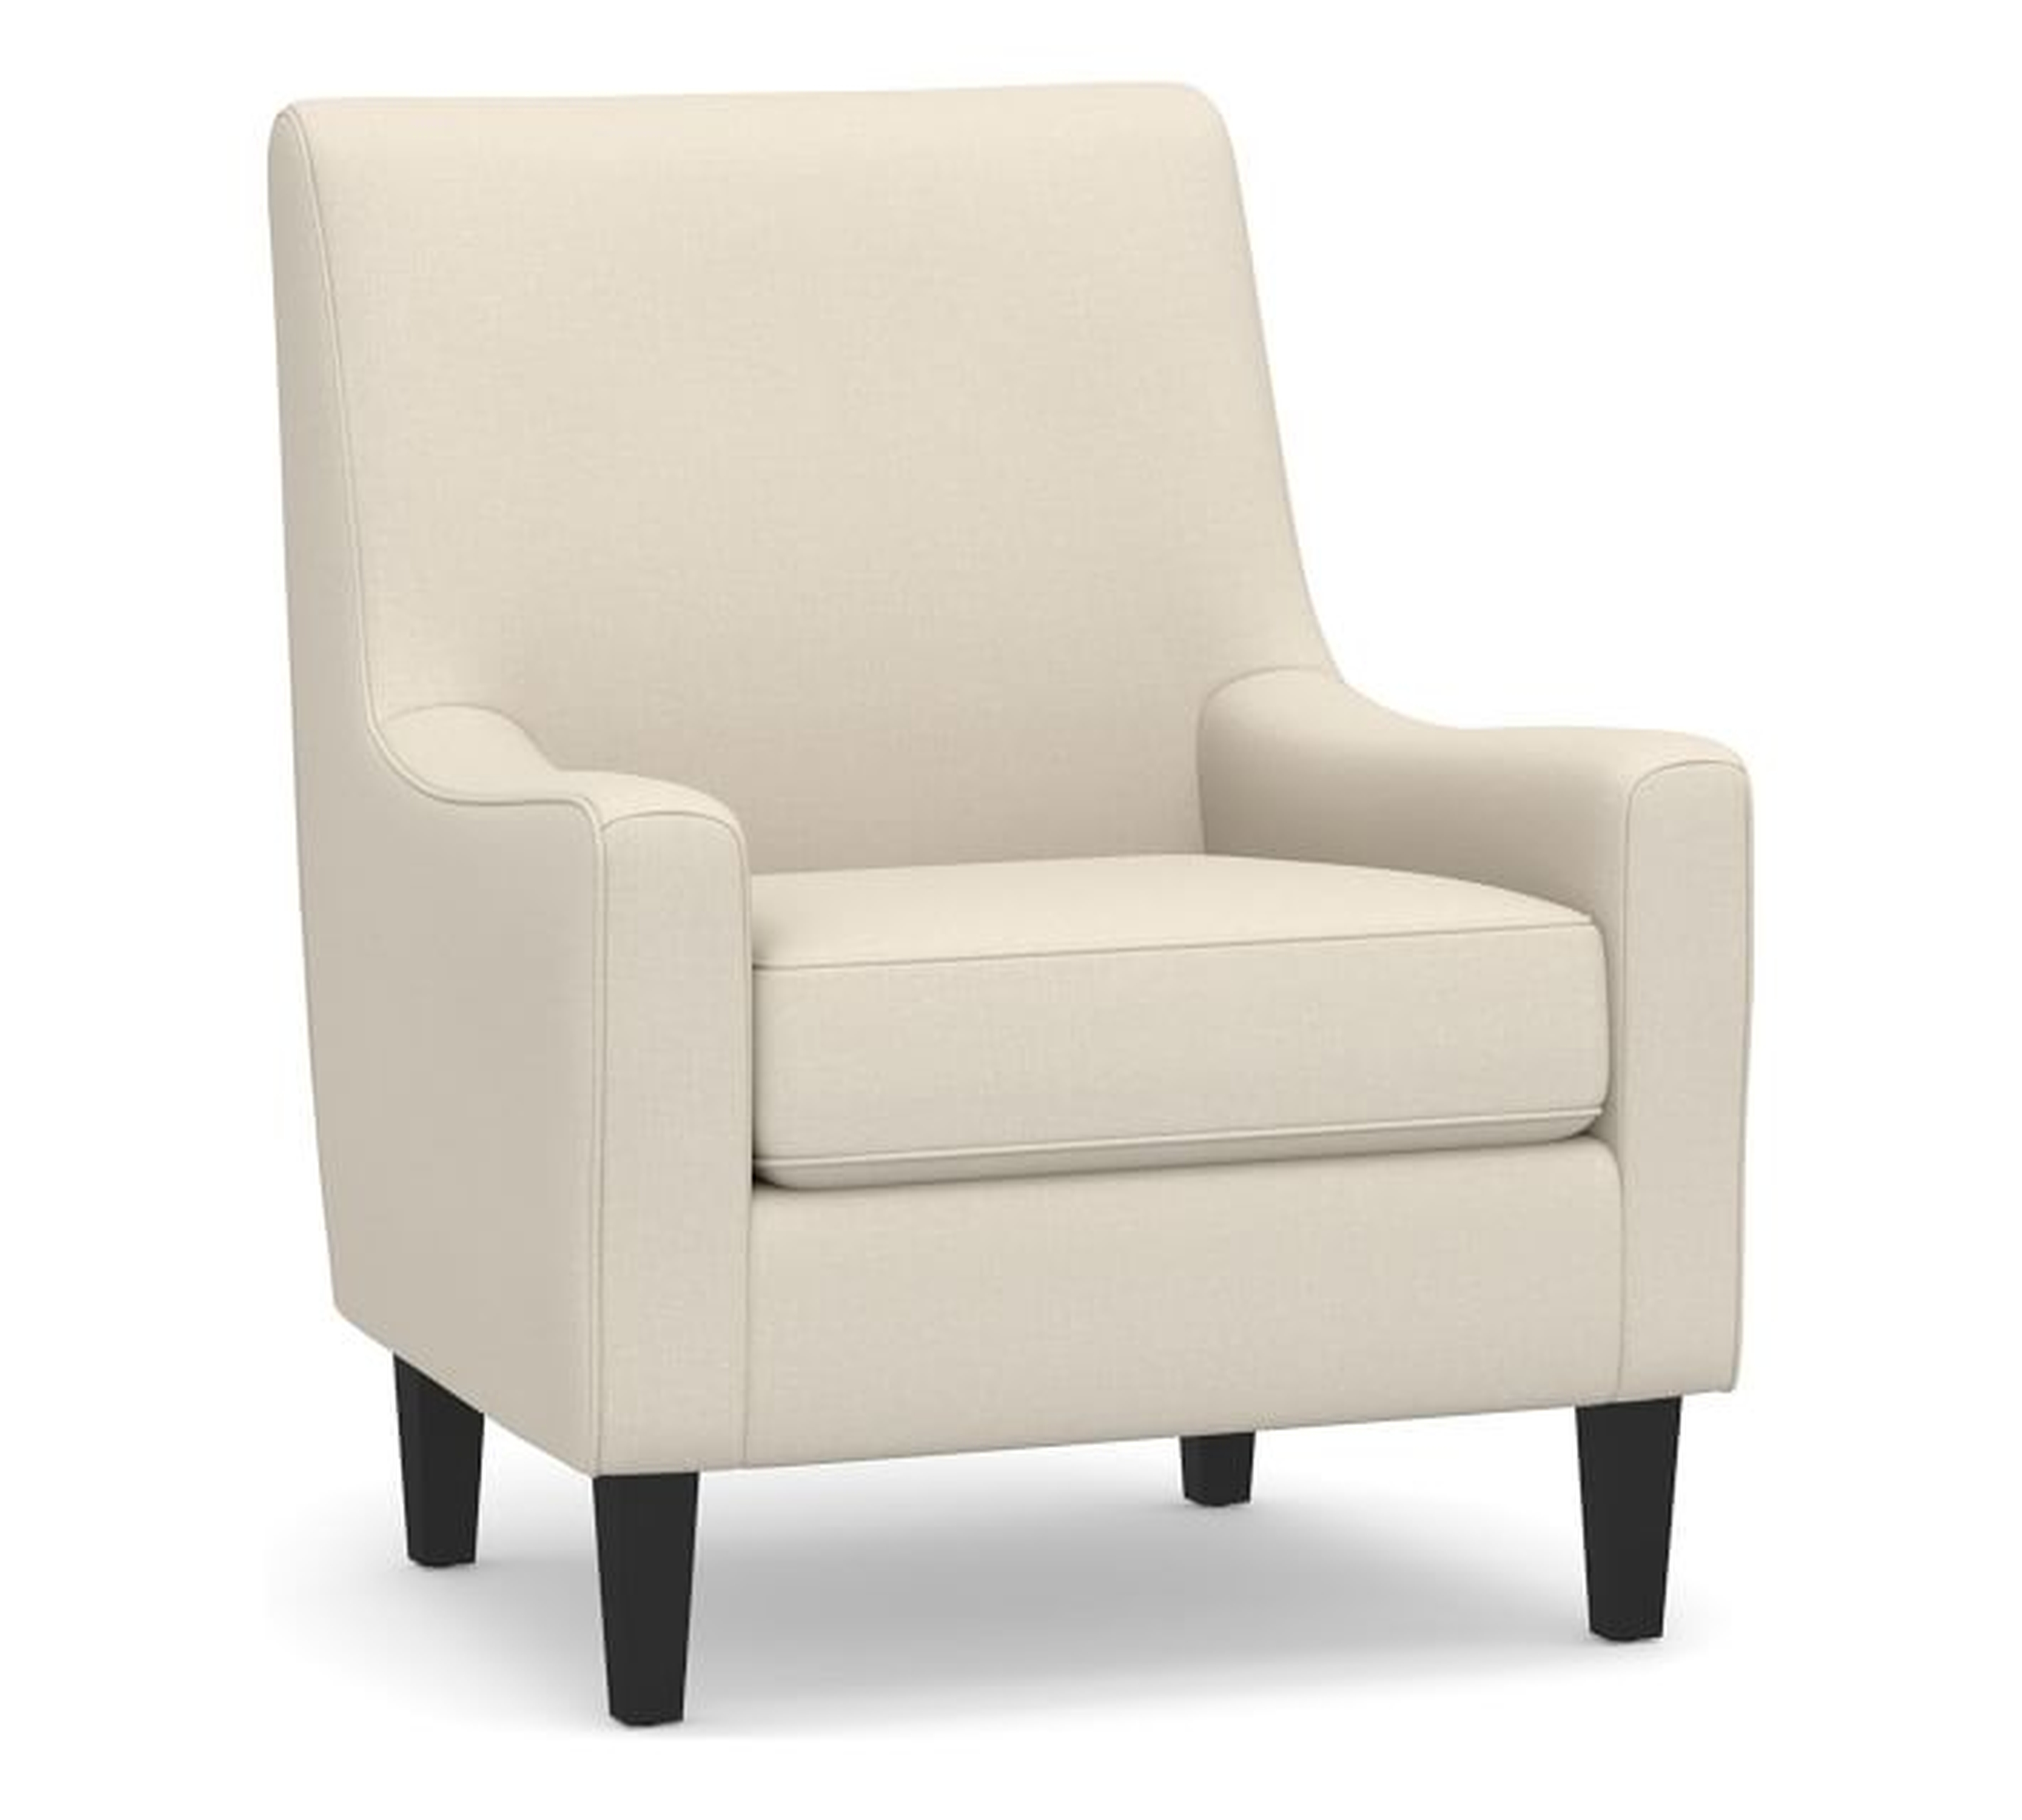 SoMa Isaac Upholstered Armchair, Polyester Wrapped Cushions, Basketweave Slub Oatmeal - Pottery Barn